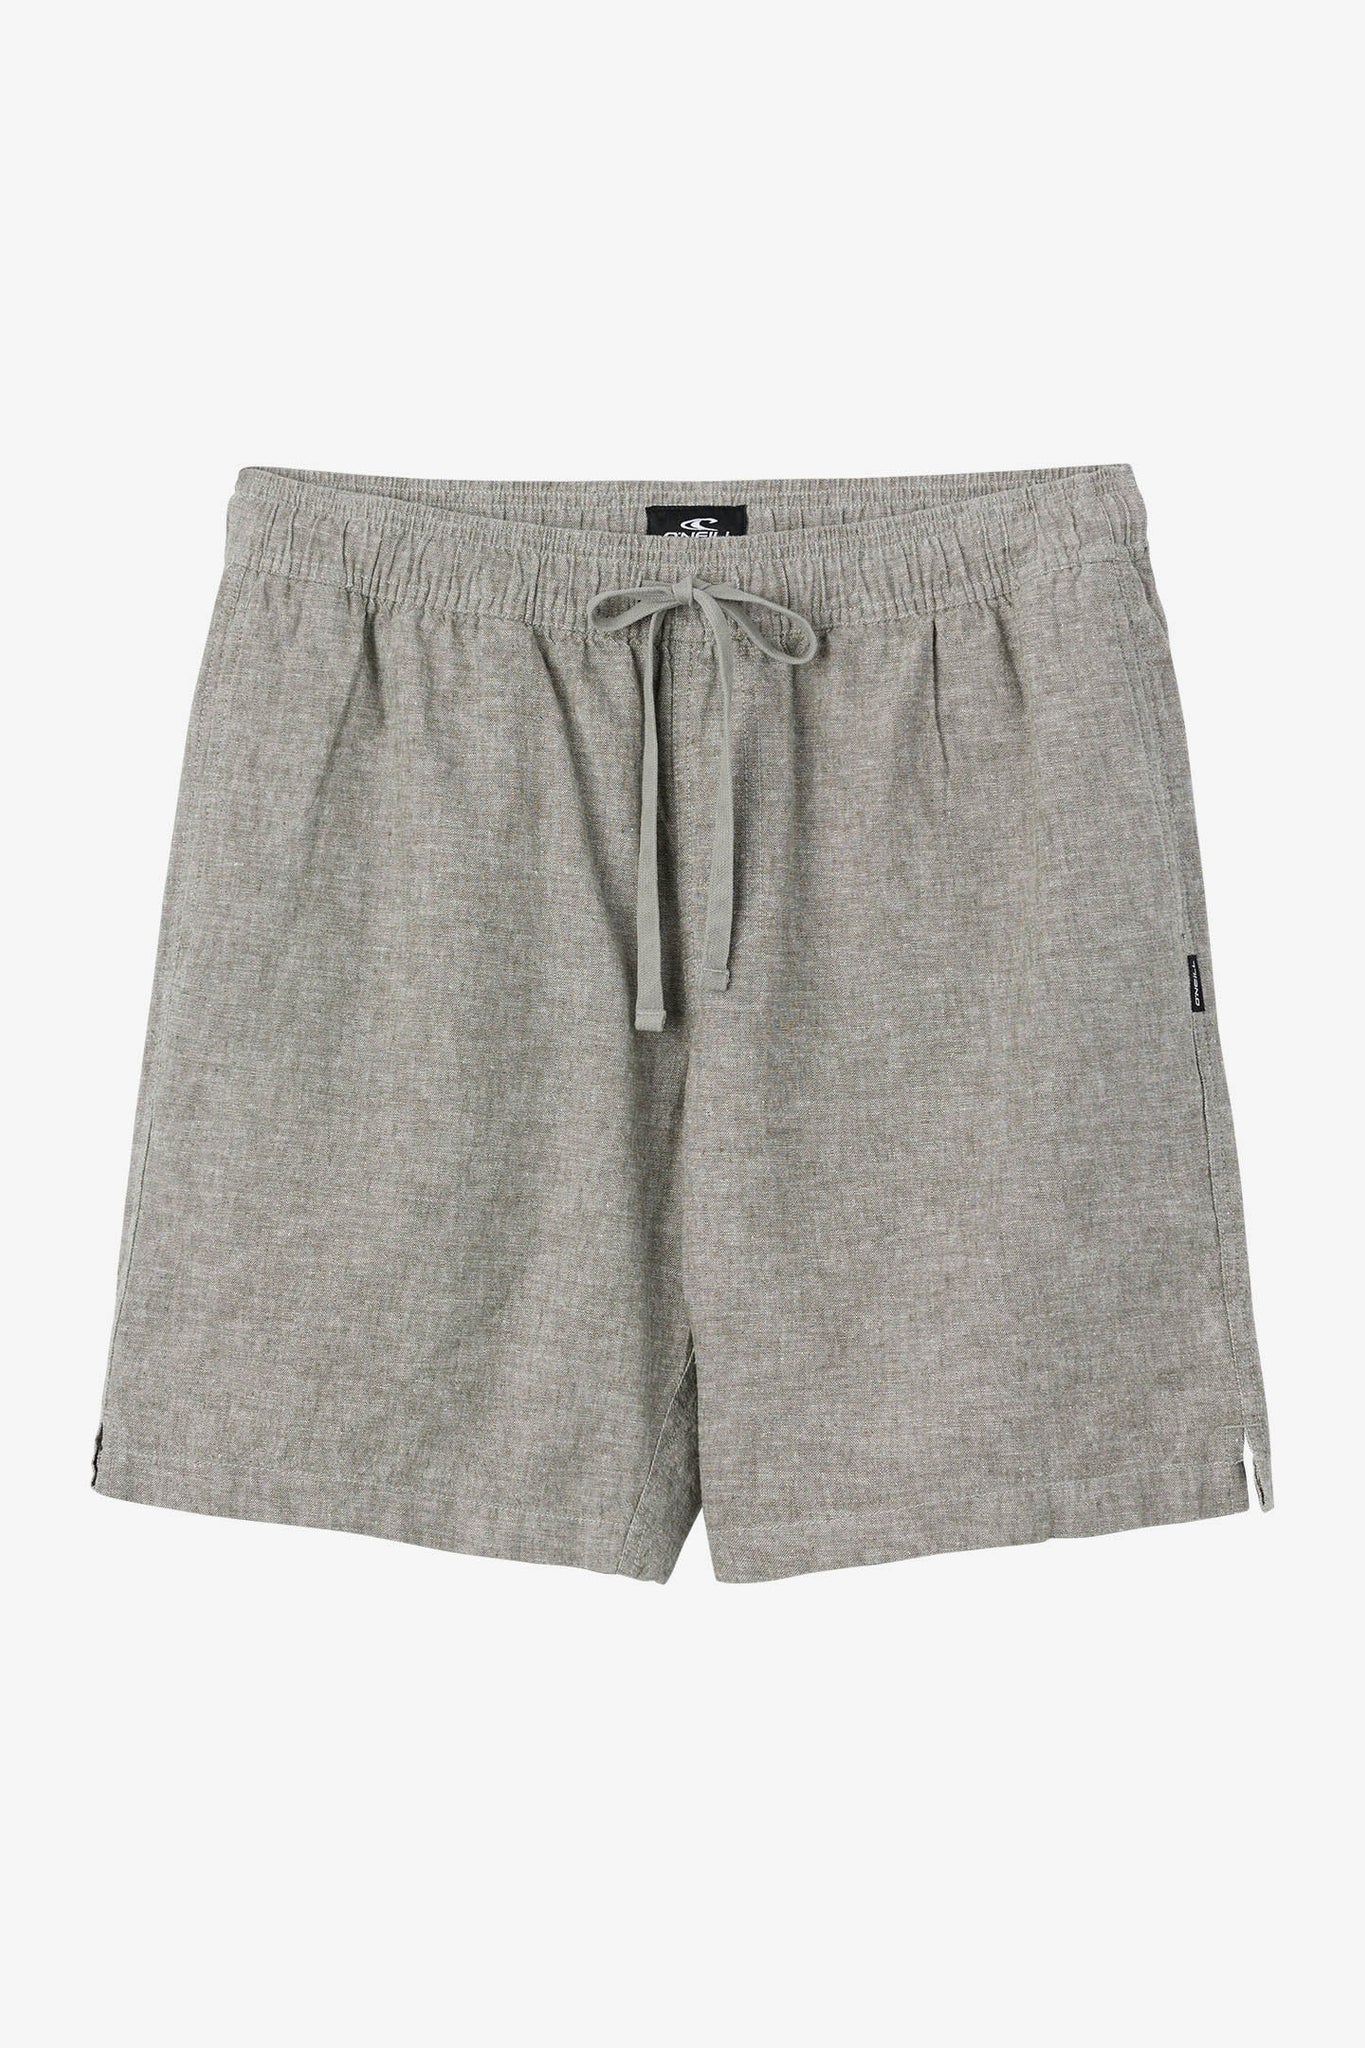 LOW KEY SOLID 18" SHORTS